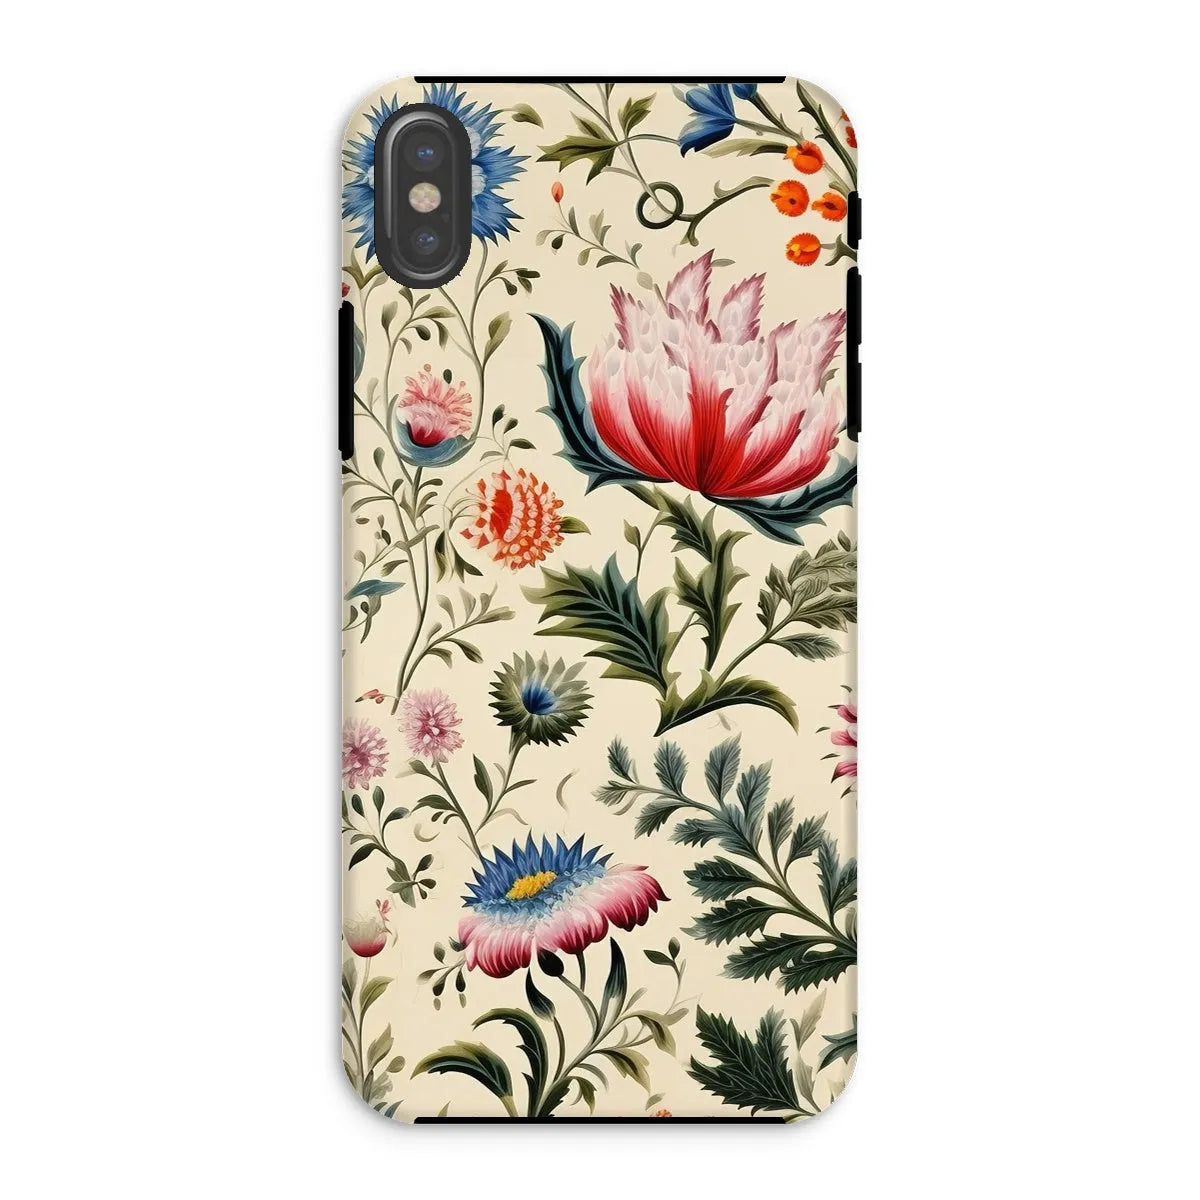 Wildflower Hoopla - Floral Garden Aesthetic Phone Case - Iphone Xs / Matte - Mobile Phone Cases - Aesthetic Art